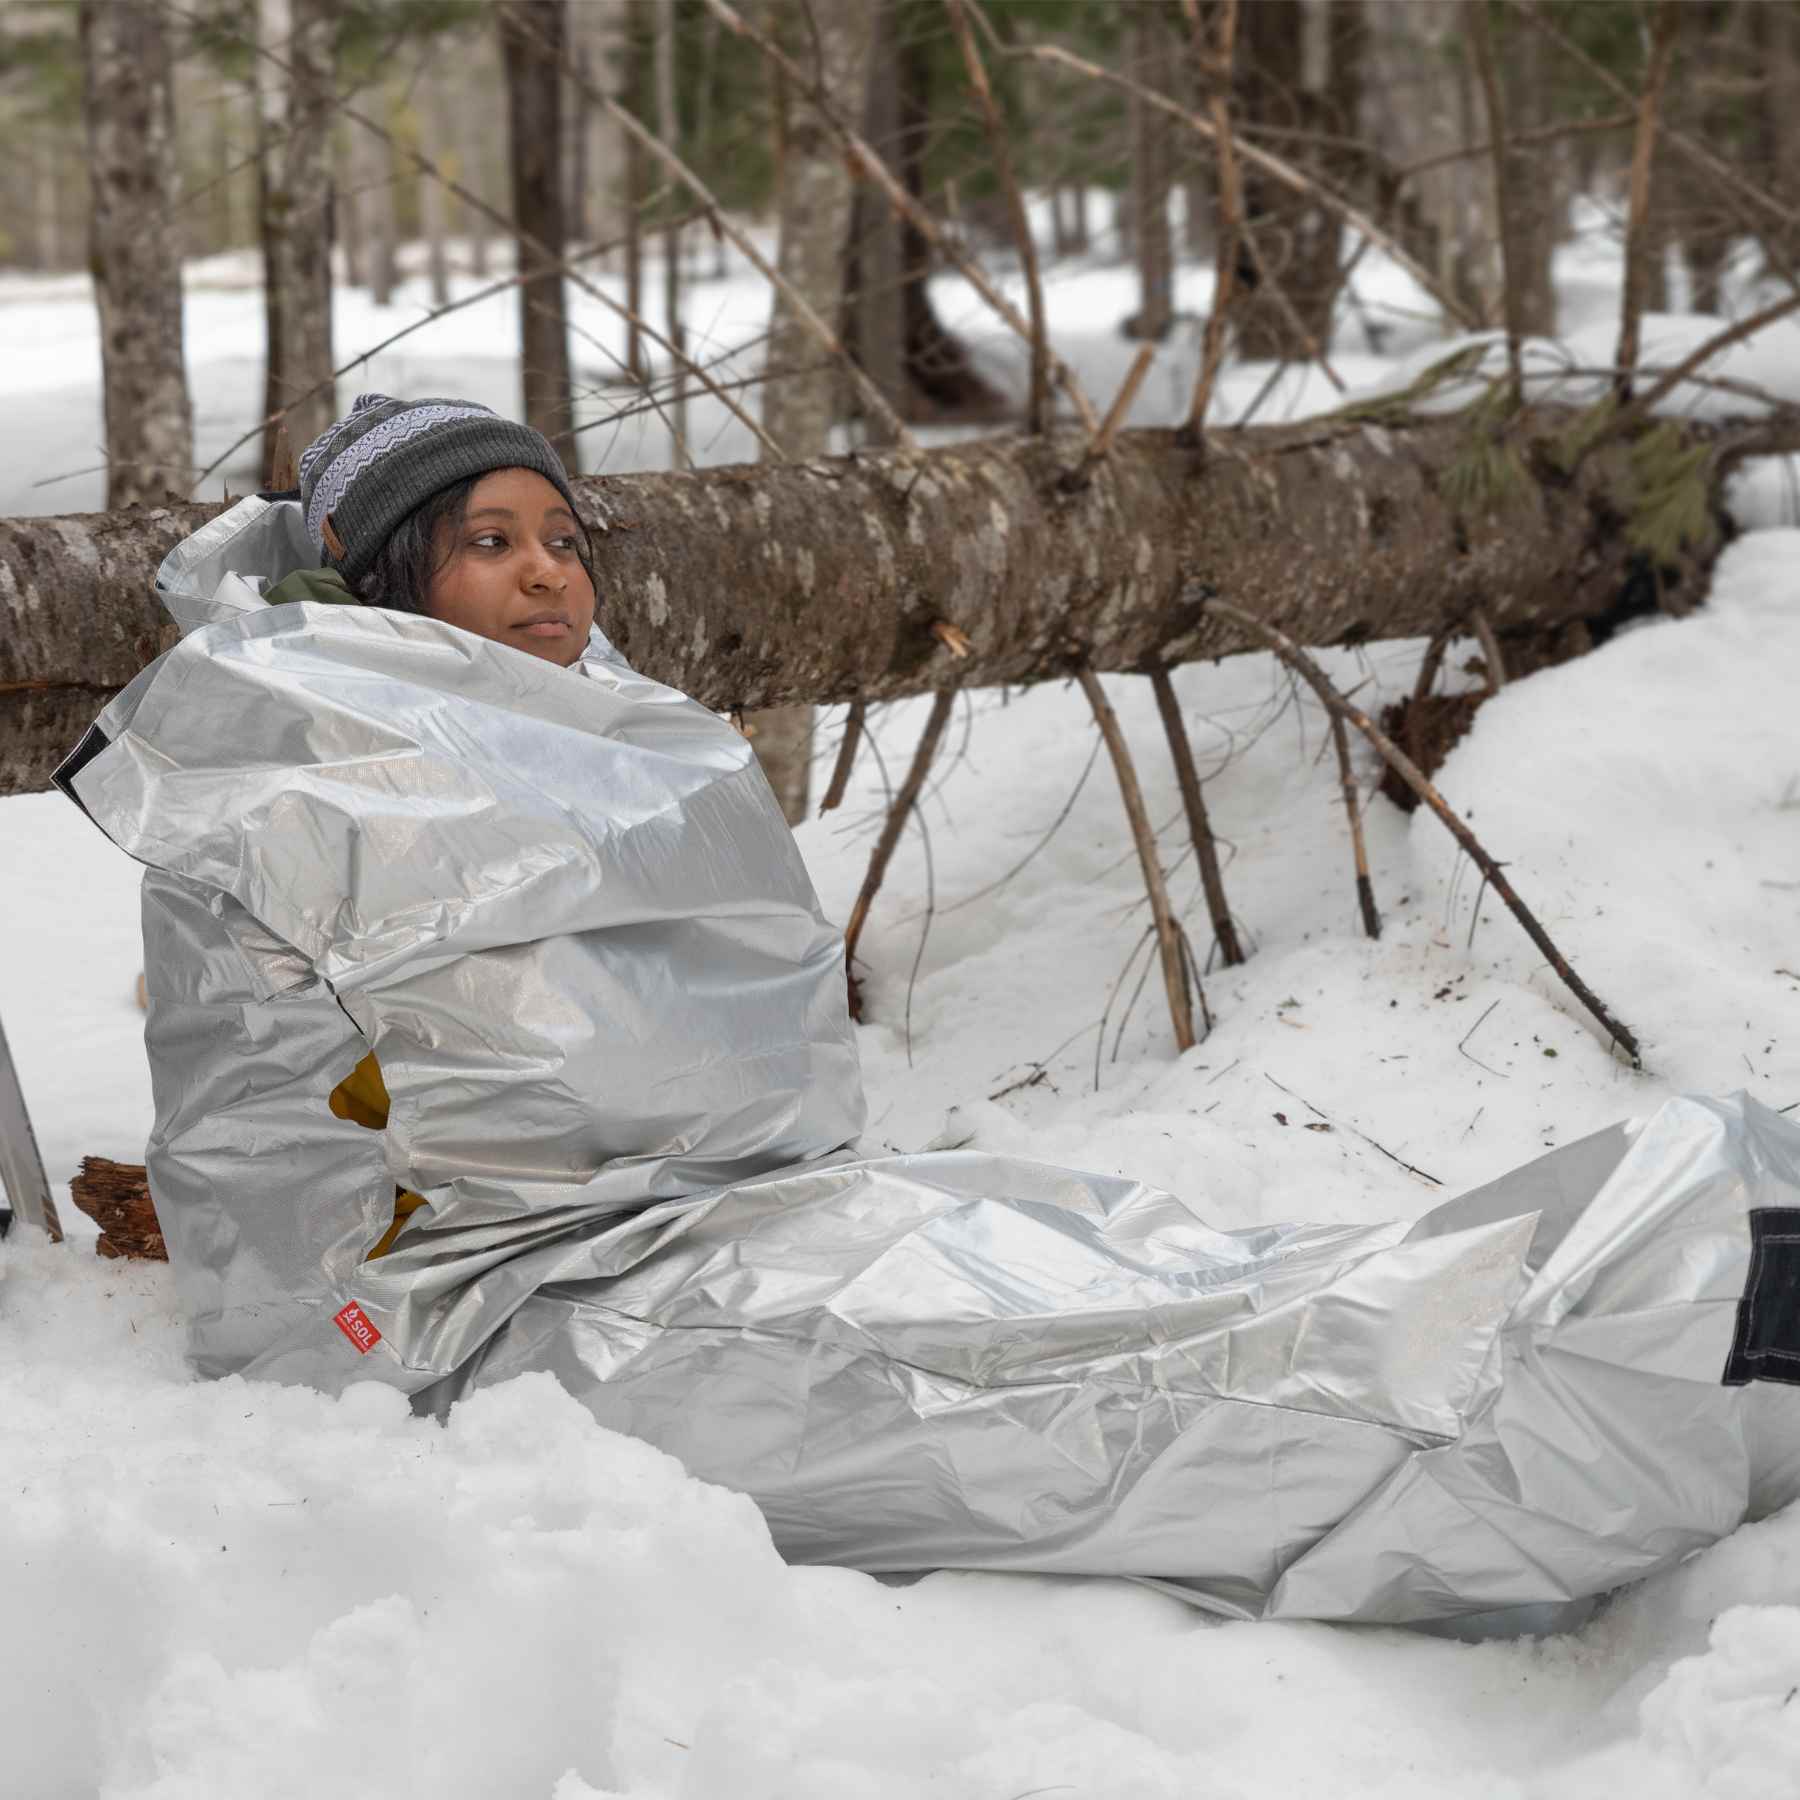 Woman in Silver SOL Thermal Bivvy Sitting in Snow Leaning on Tree with Blue Backpack and Skis Next to Her